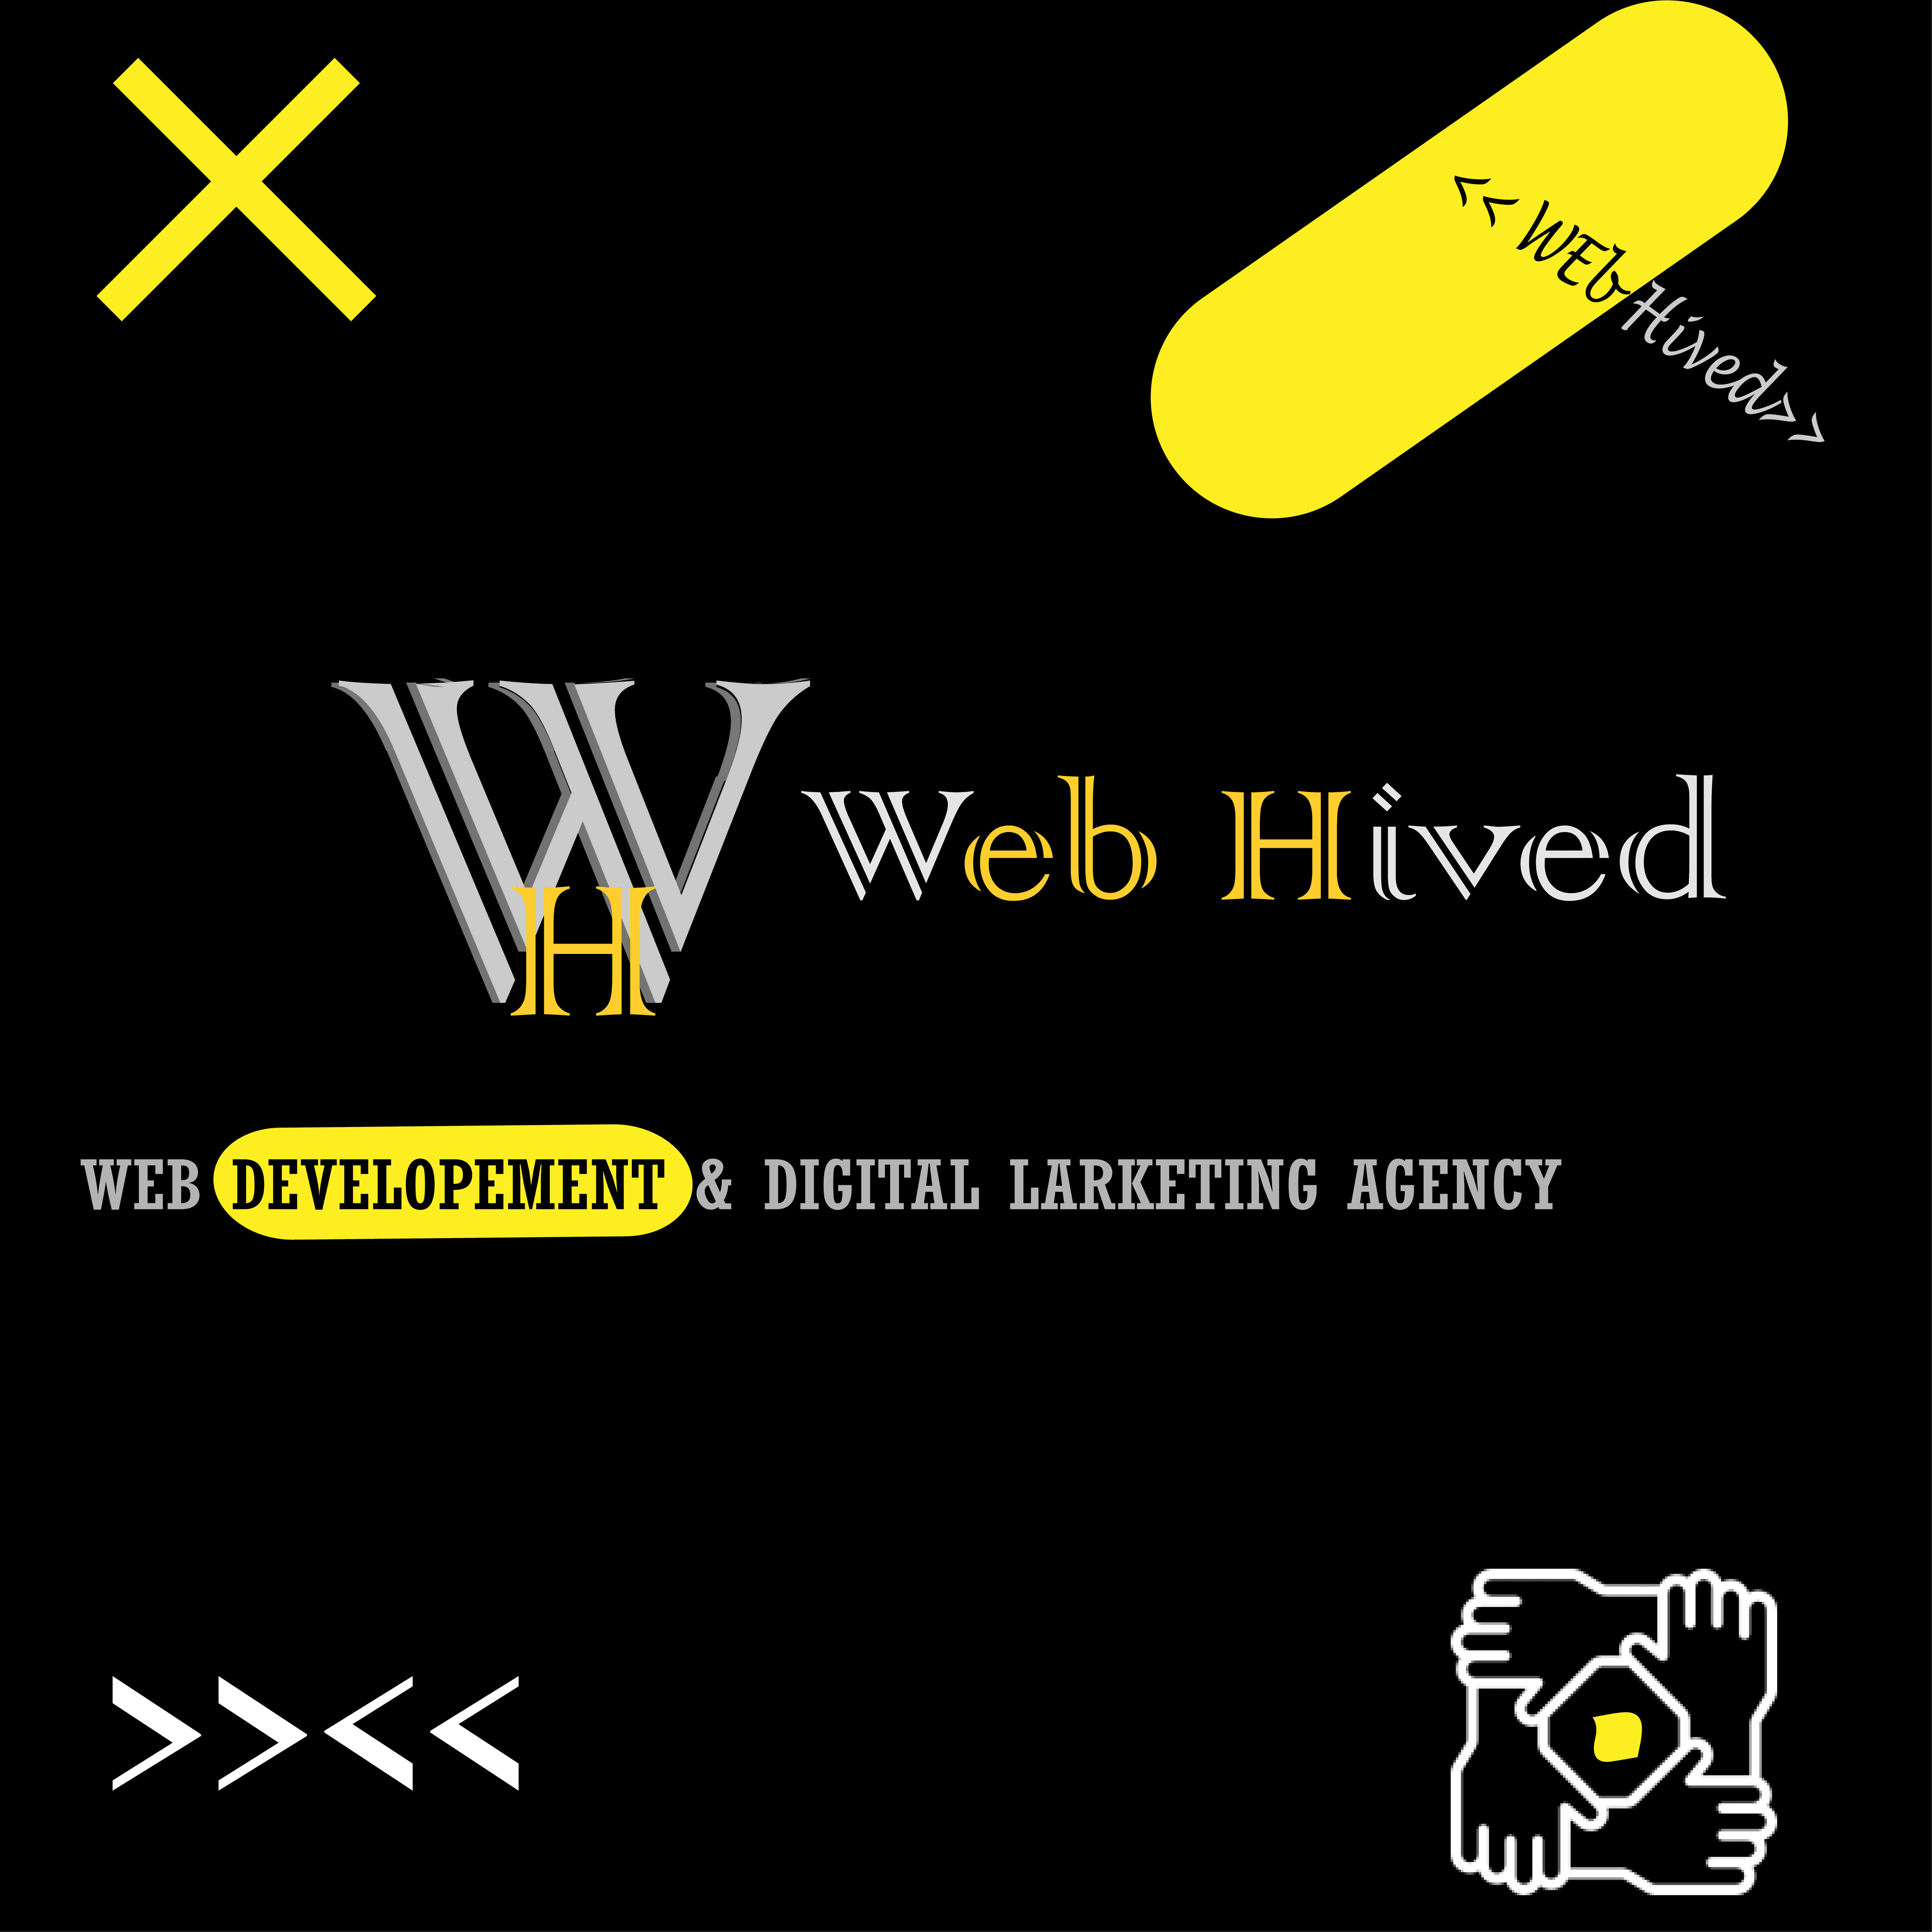 WebHived agency cover